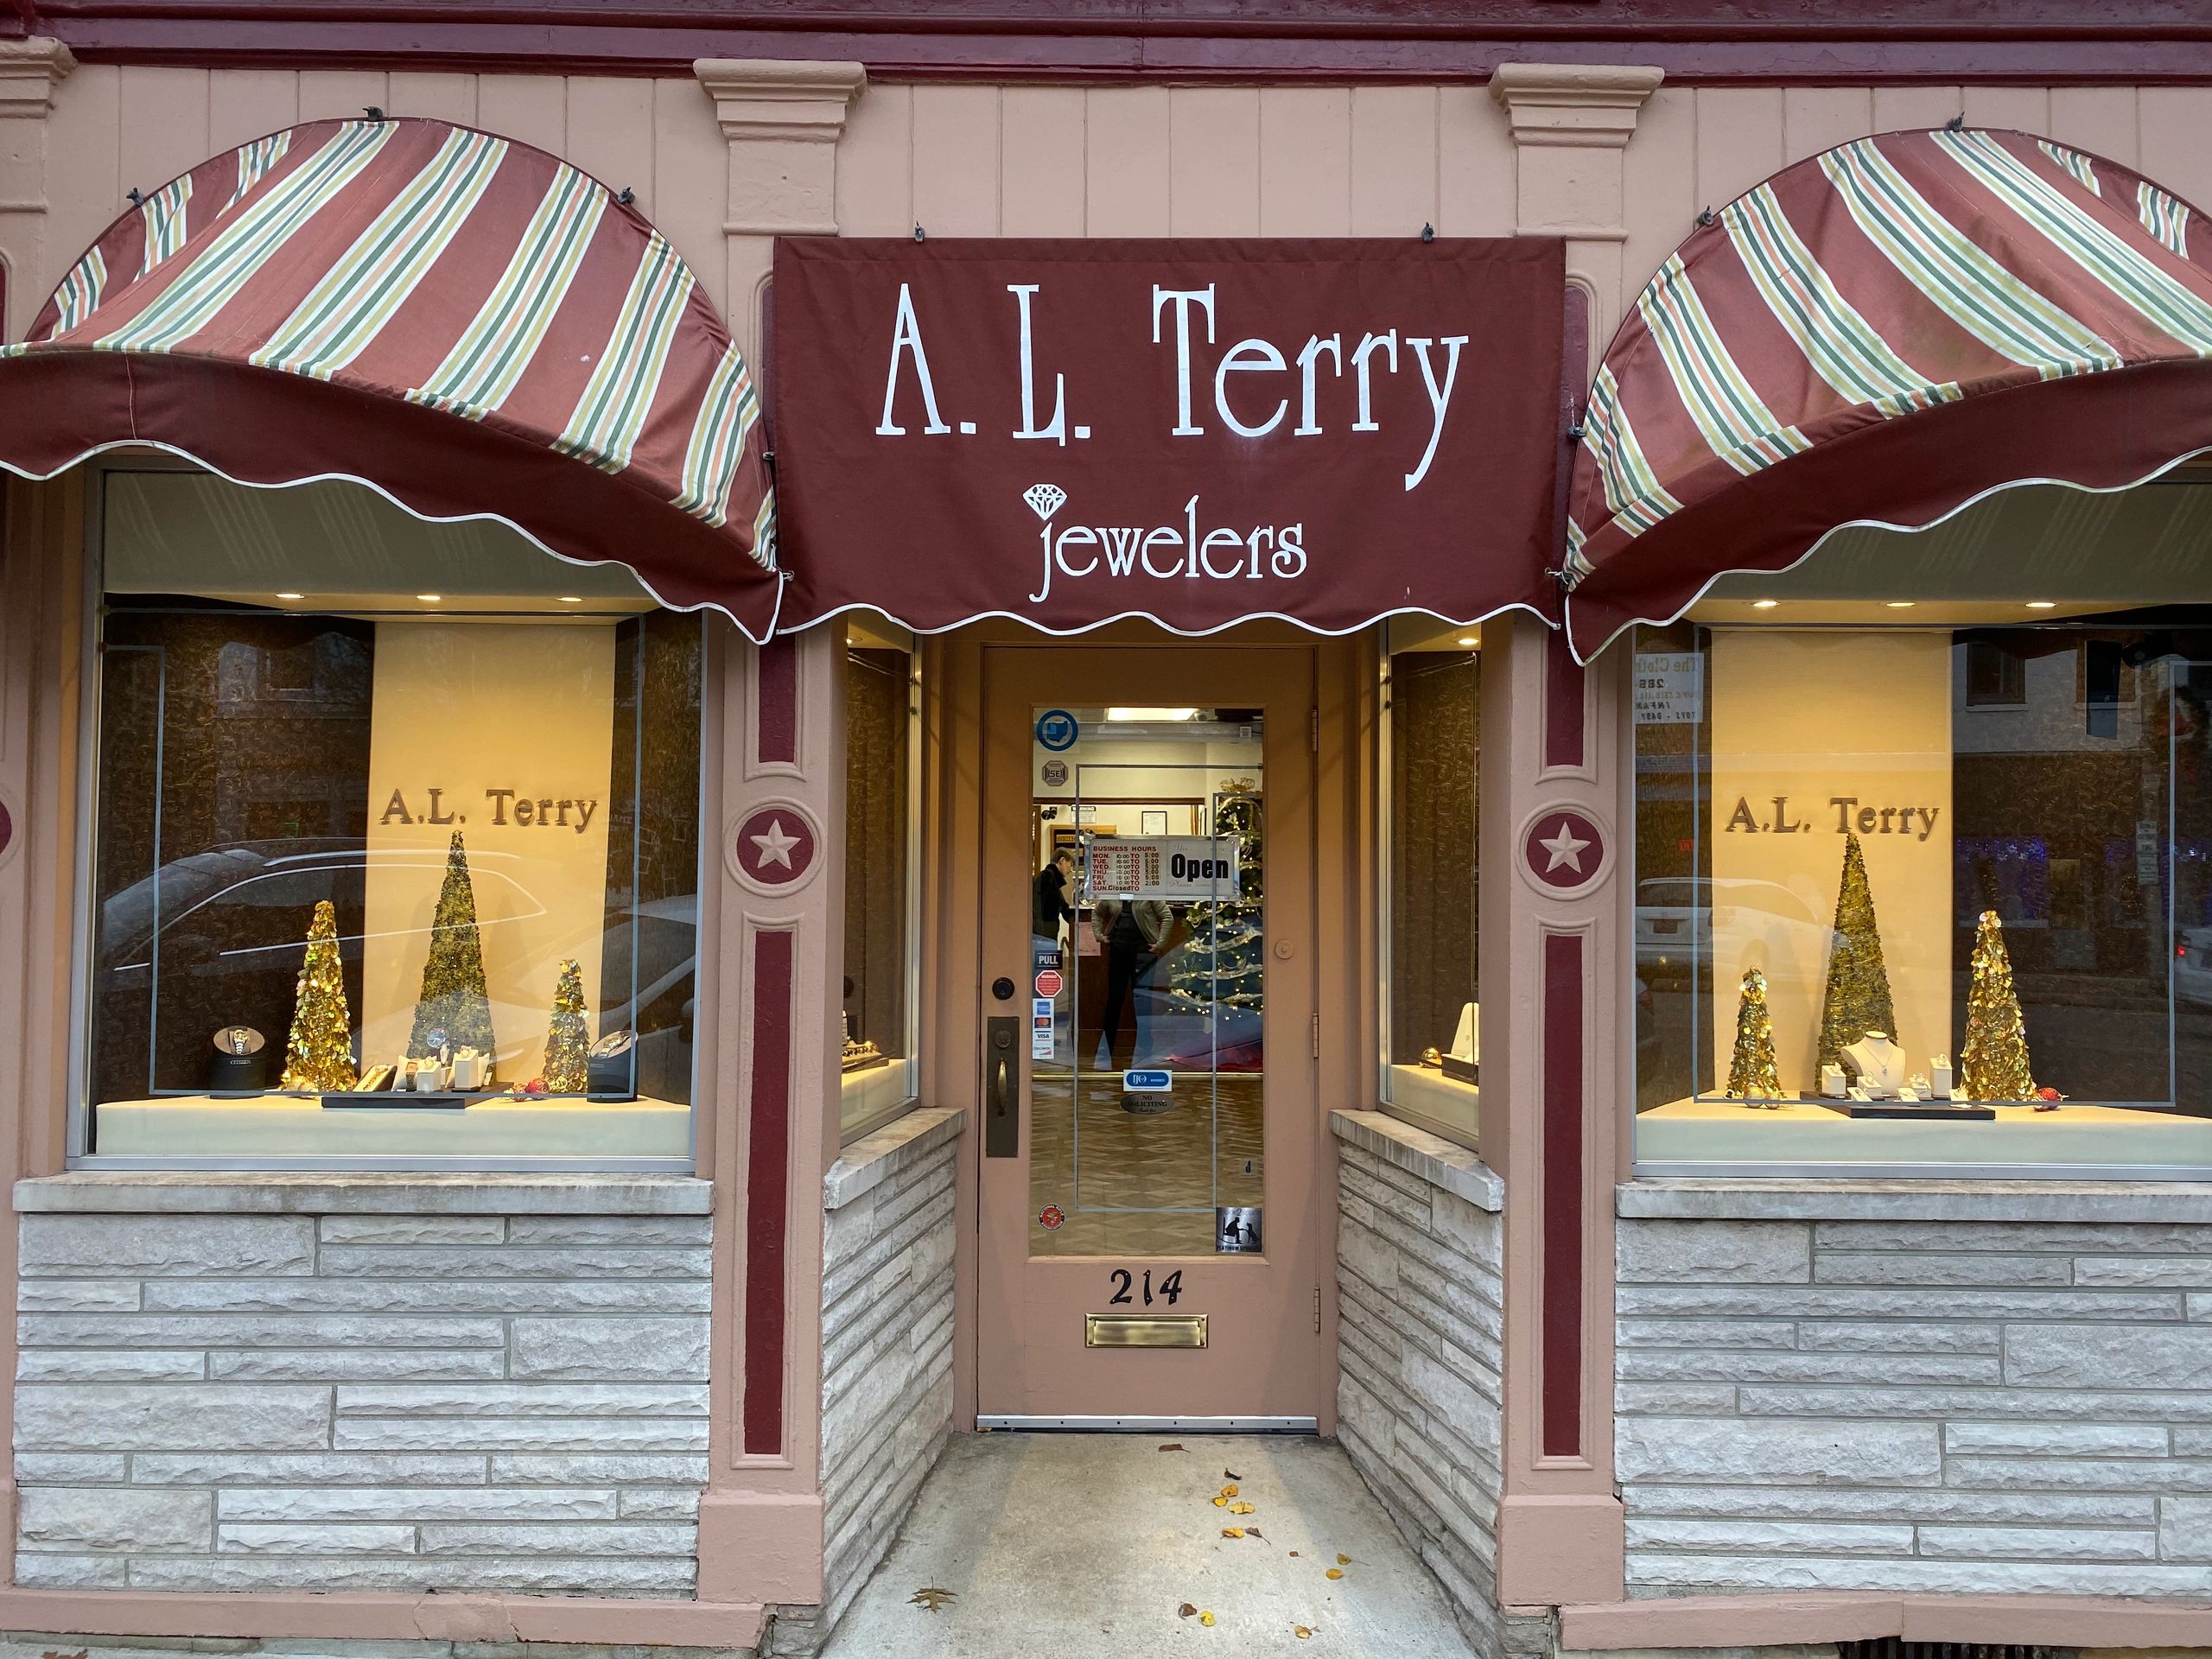 A. L. Terry Jewelers